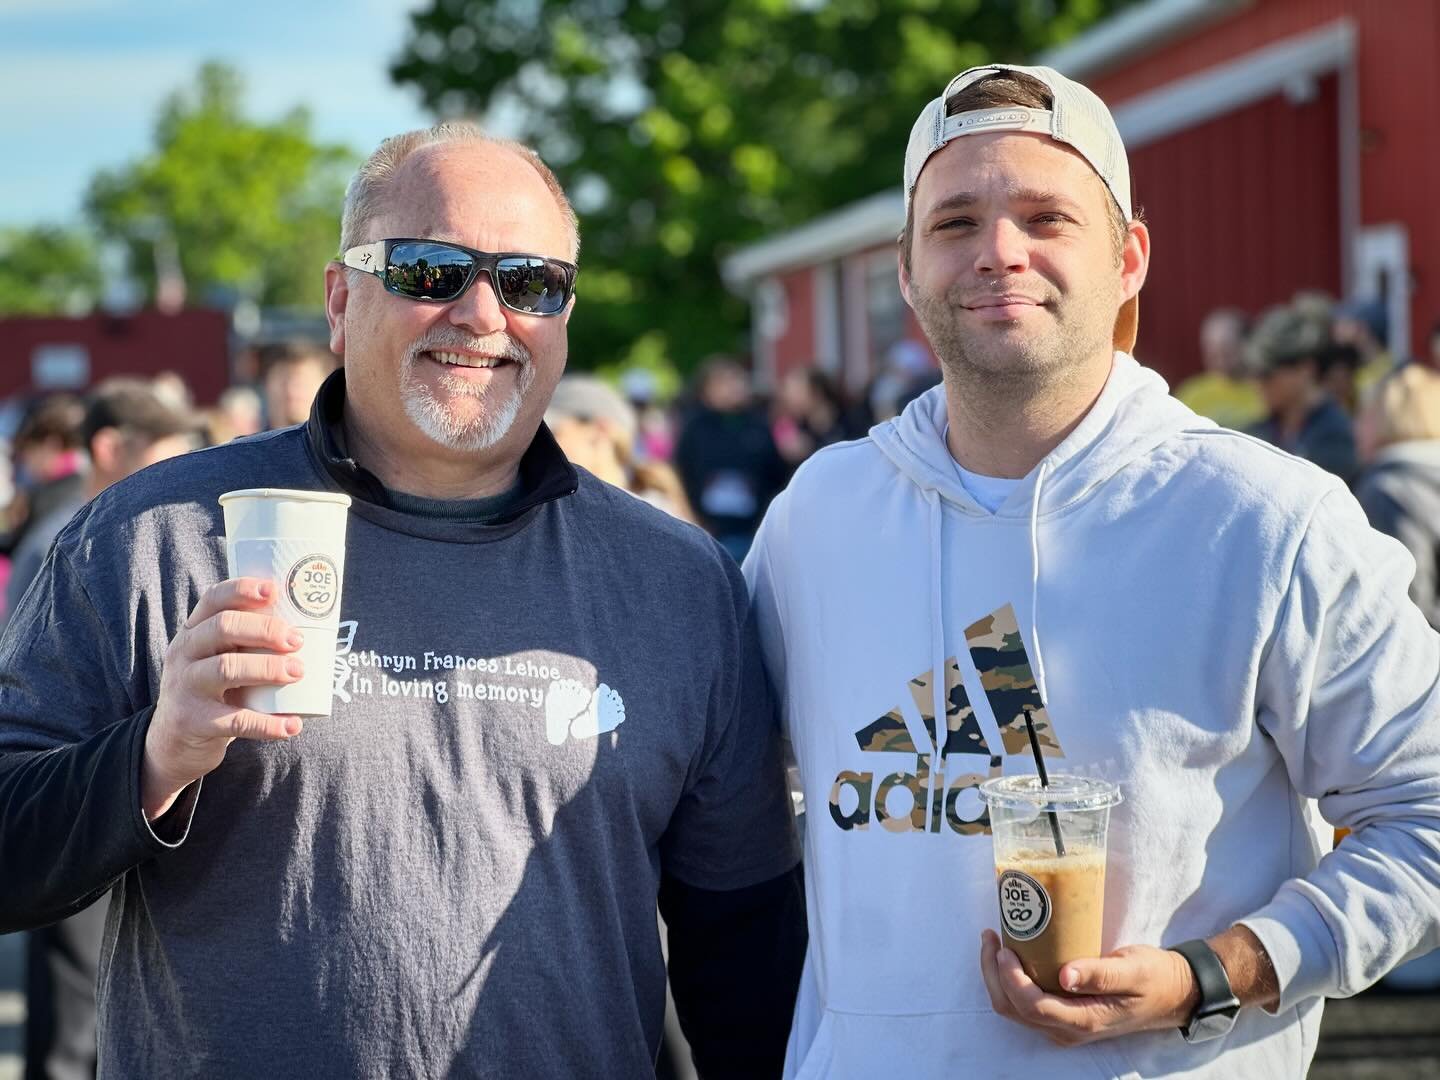 Folks across the county were running towards an amazing cup of Joe and so much more! We made countless new friends at two 5K festivals with @friends.of.angels in Strasburg and @friendship_community near Lititz. These organizations provide so much for